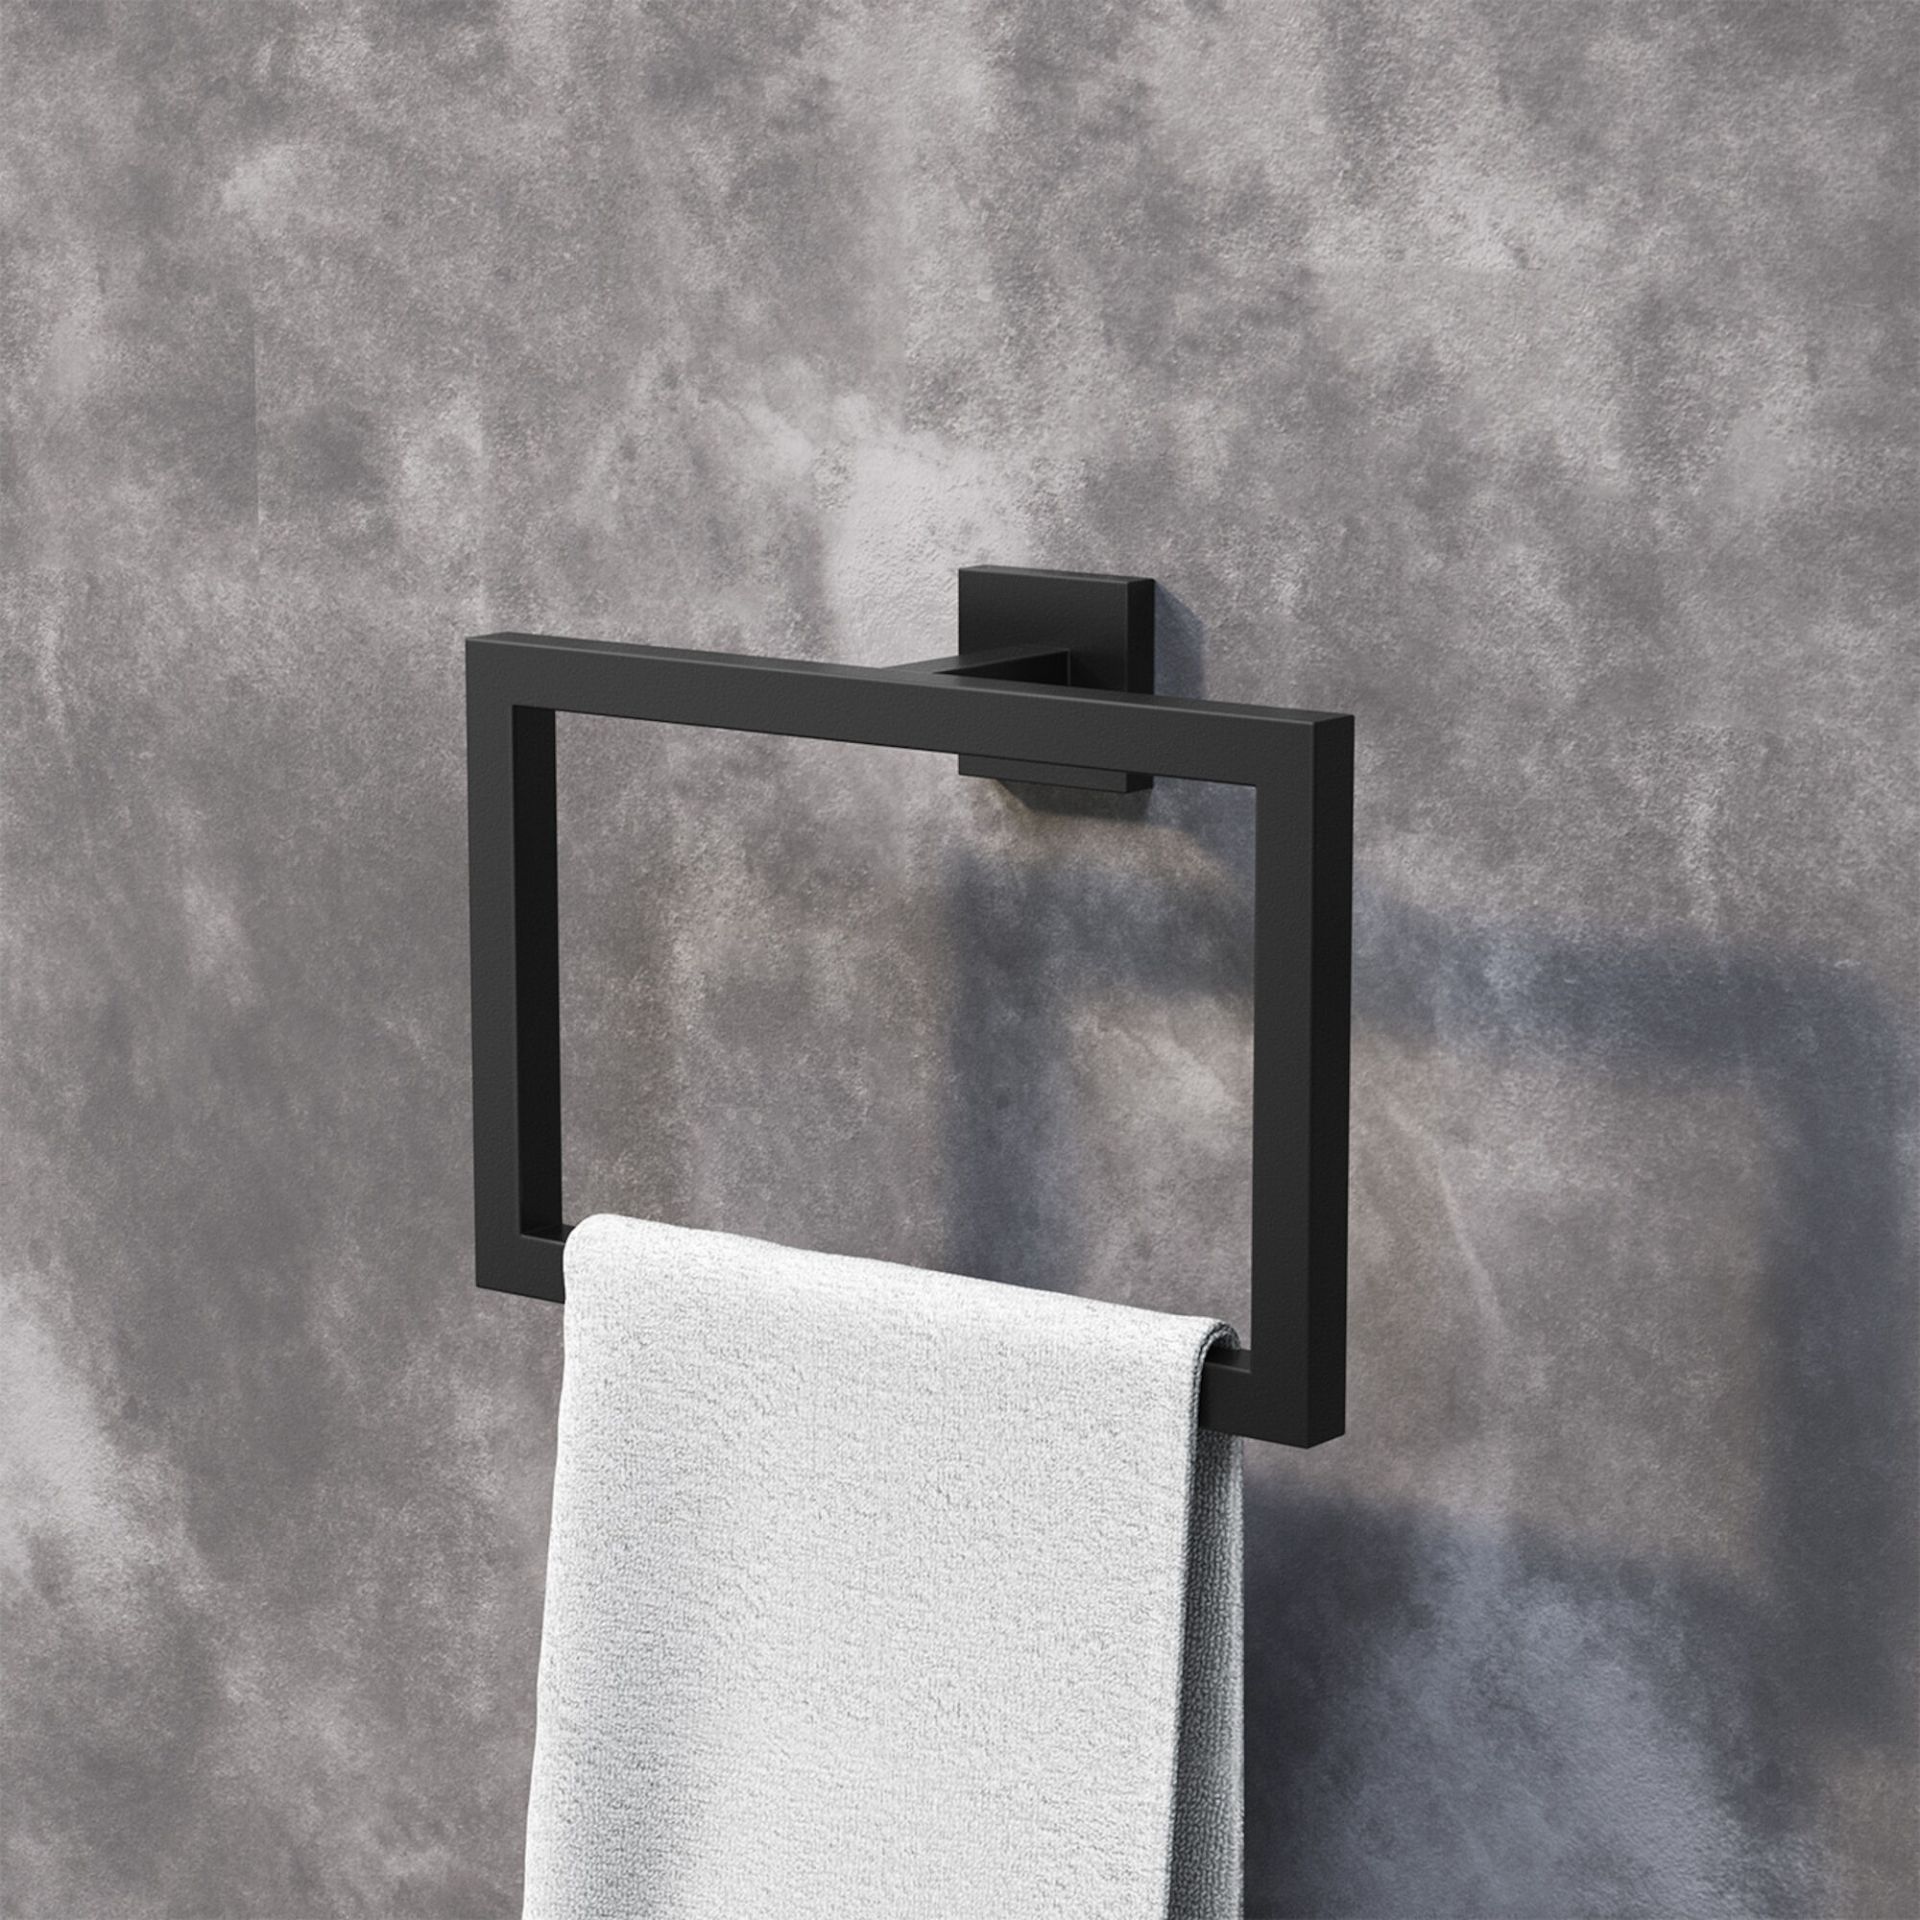 (SH1005) Iker Black Towel Ring Statement aesthetic for minimalist appeal Luxurious, corrosion...